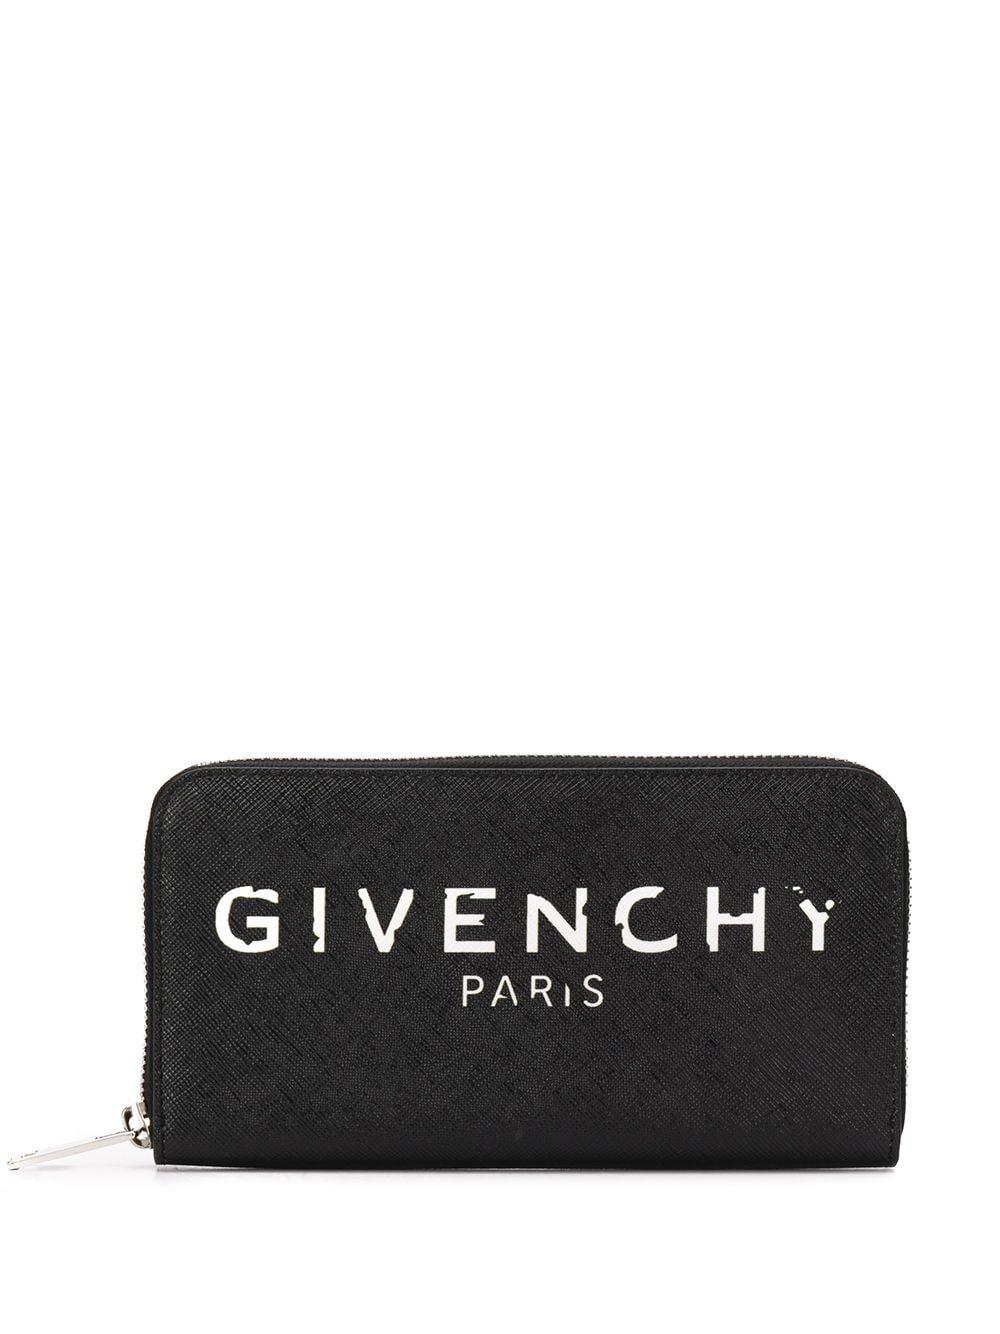 Givenchy Iconic Leather Zip Wallet in Black - Save 17% - Lyst